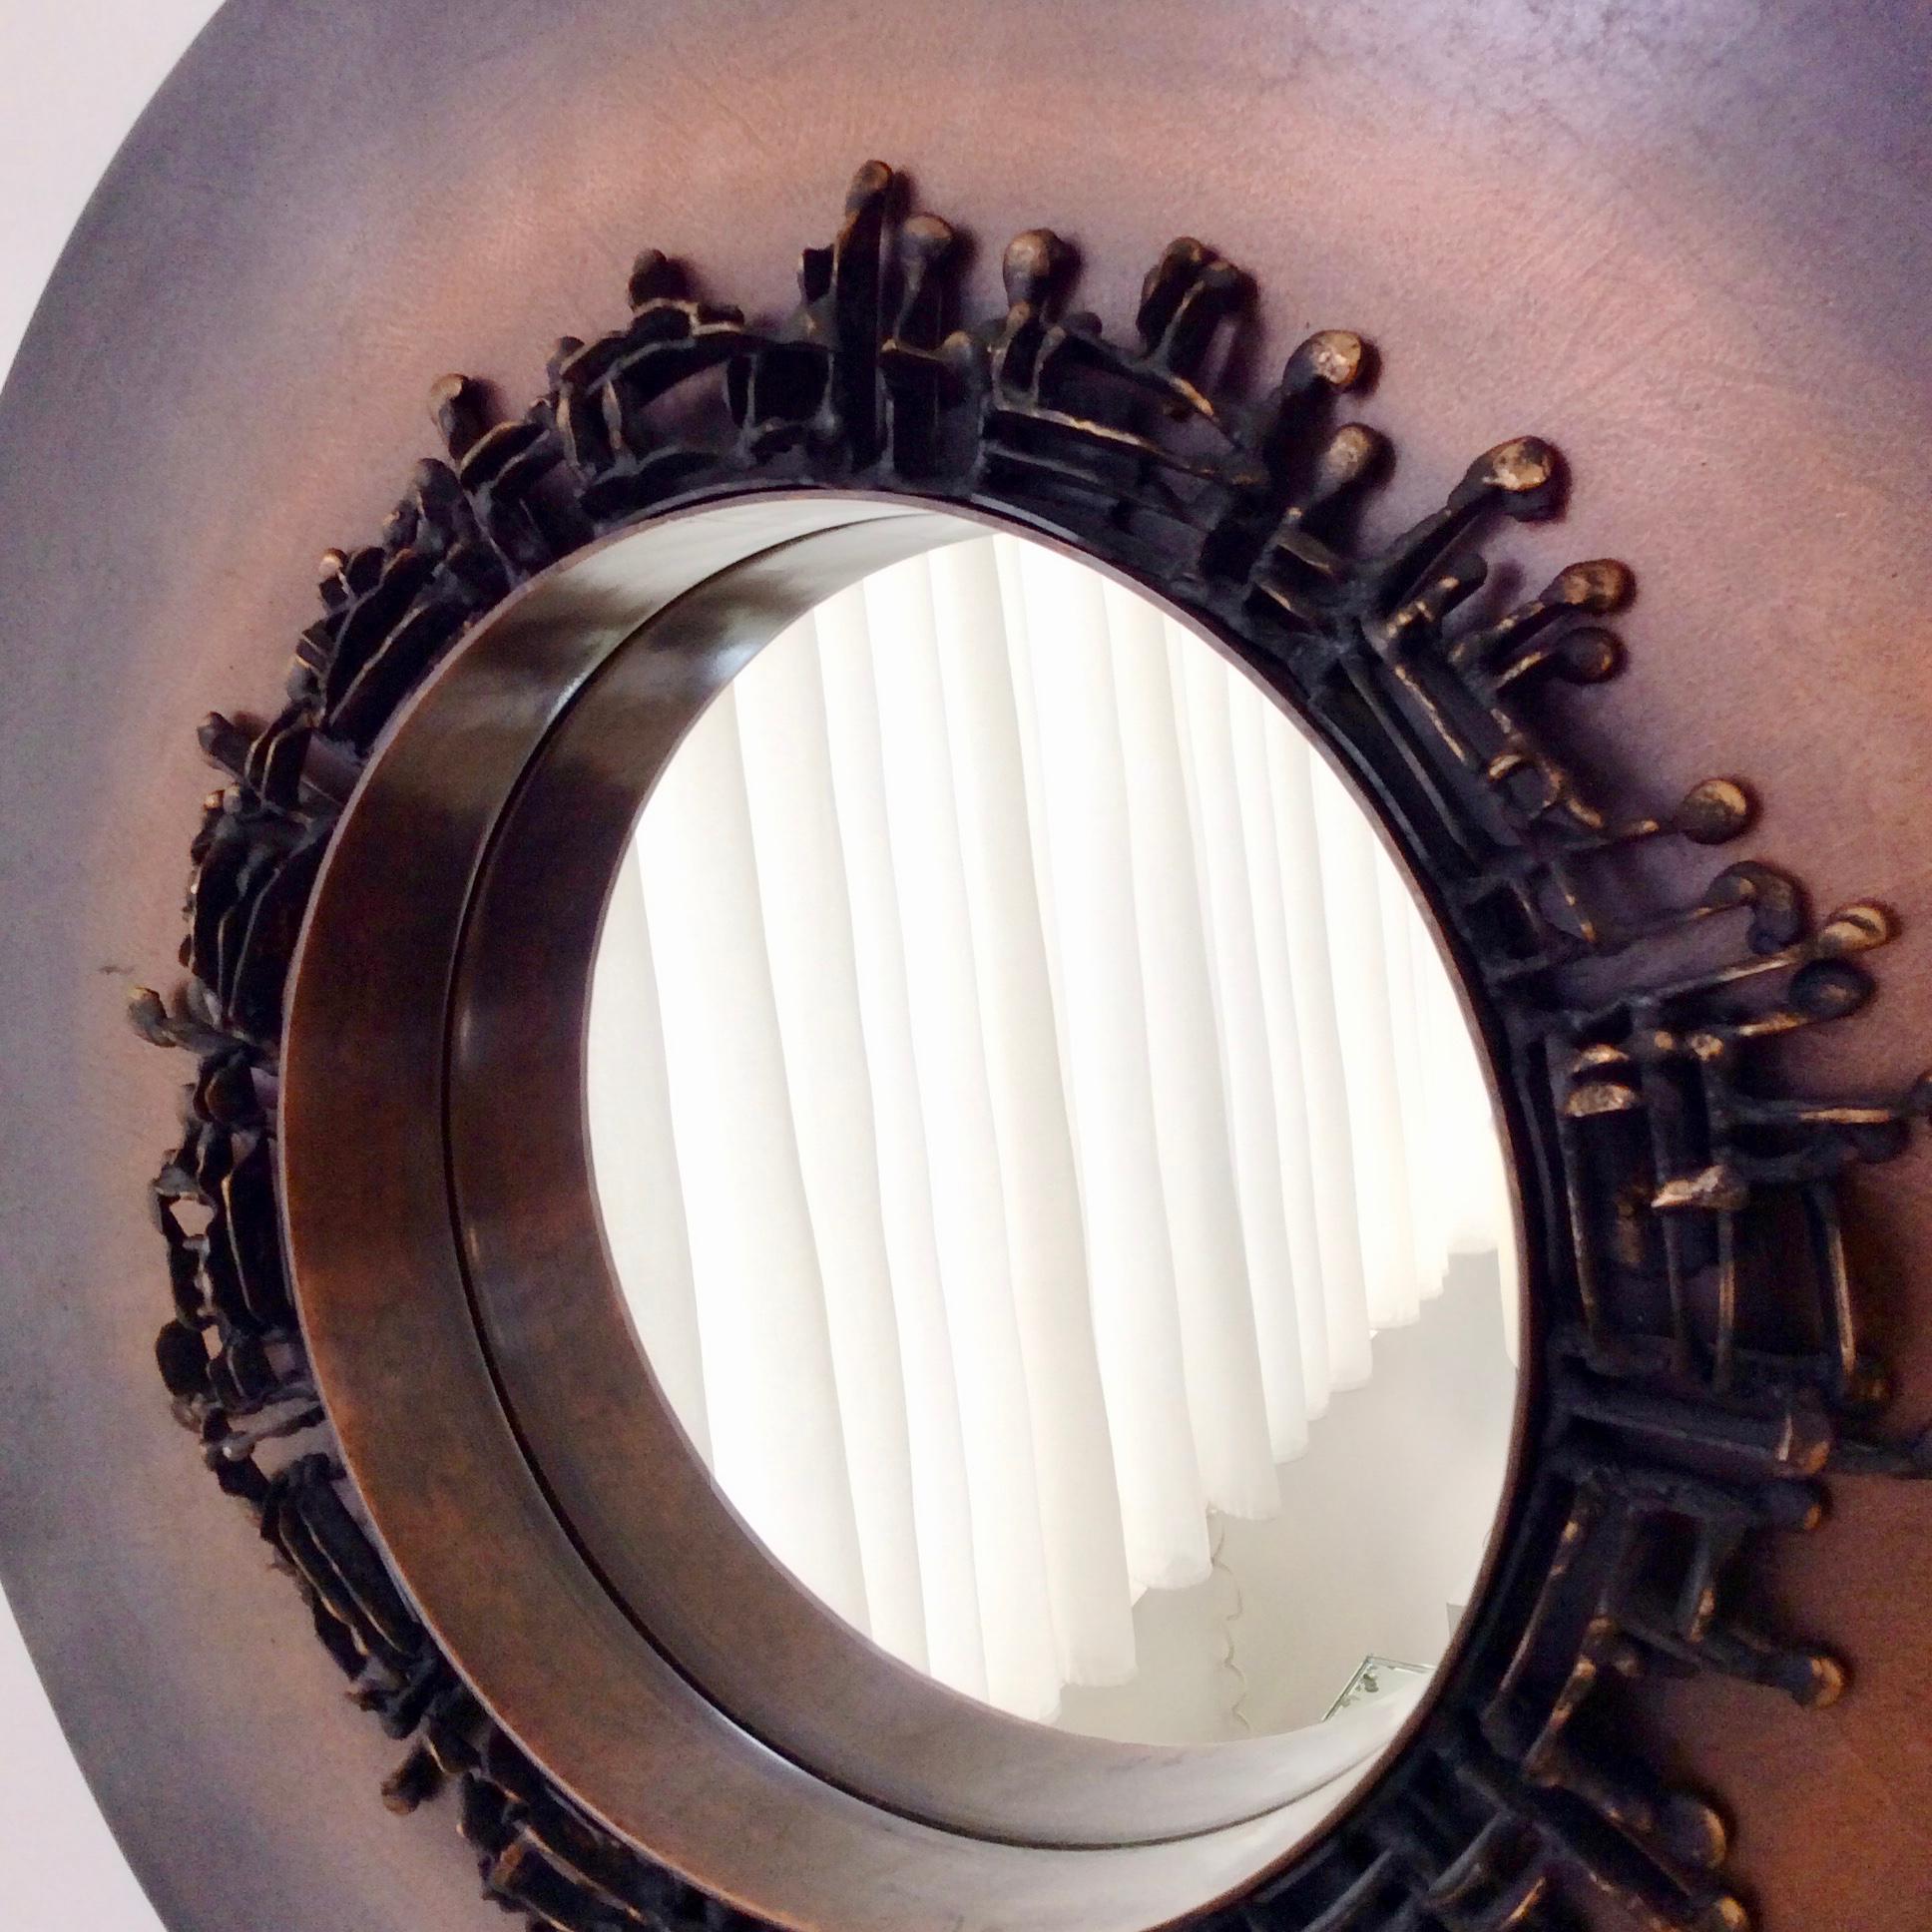 Brutalist round mirror, circa 1970, France.
Bronze patinated metal.
Dimensions: Total diameter: 50 cm, diameter of the mirrored glass 23 cm. 7 cm D.
Good original condition.
All purchases are covered by our Buyer Protection Guarantee.
This item can